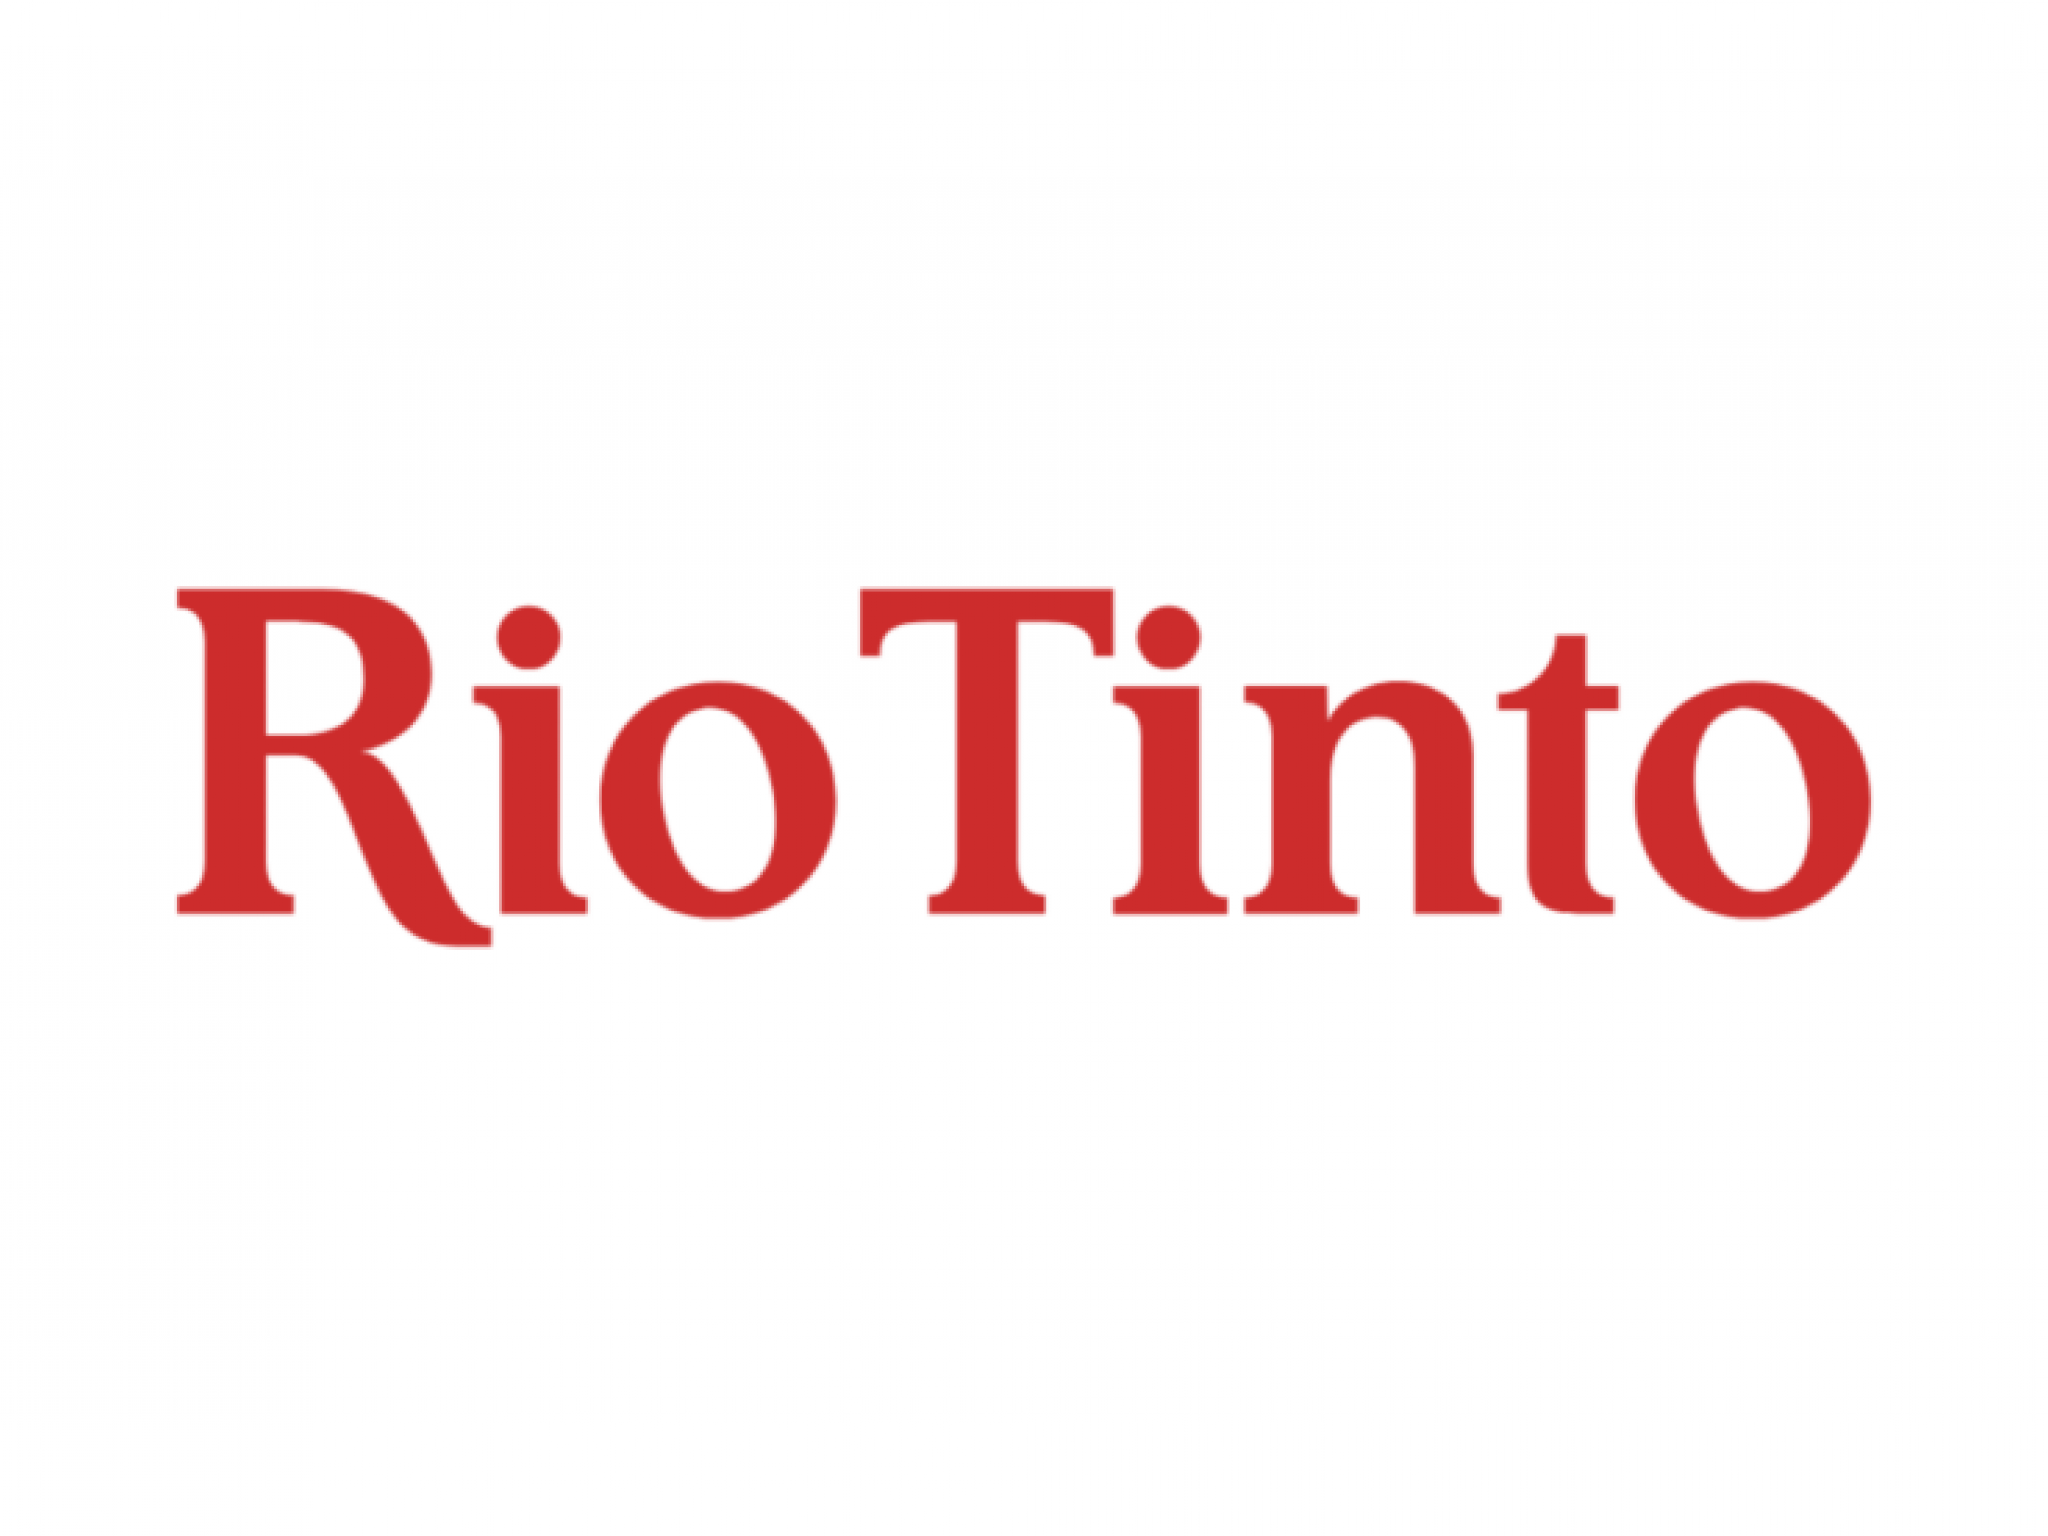  rio-tinto-invests-143m-in-low-emission-steel-research-and-development 